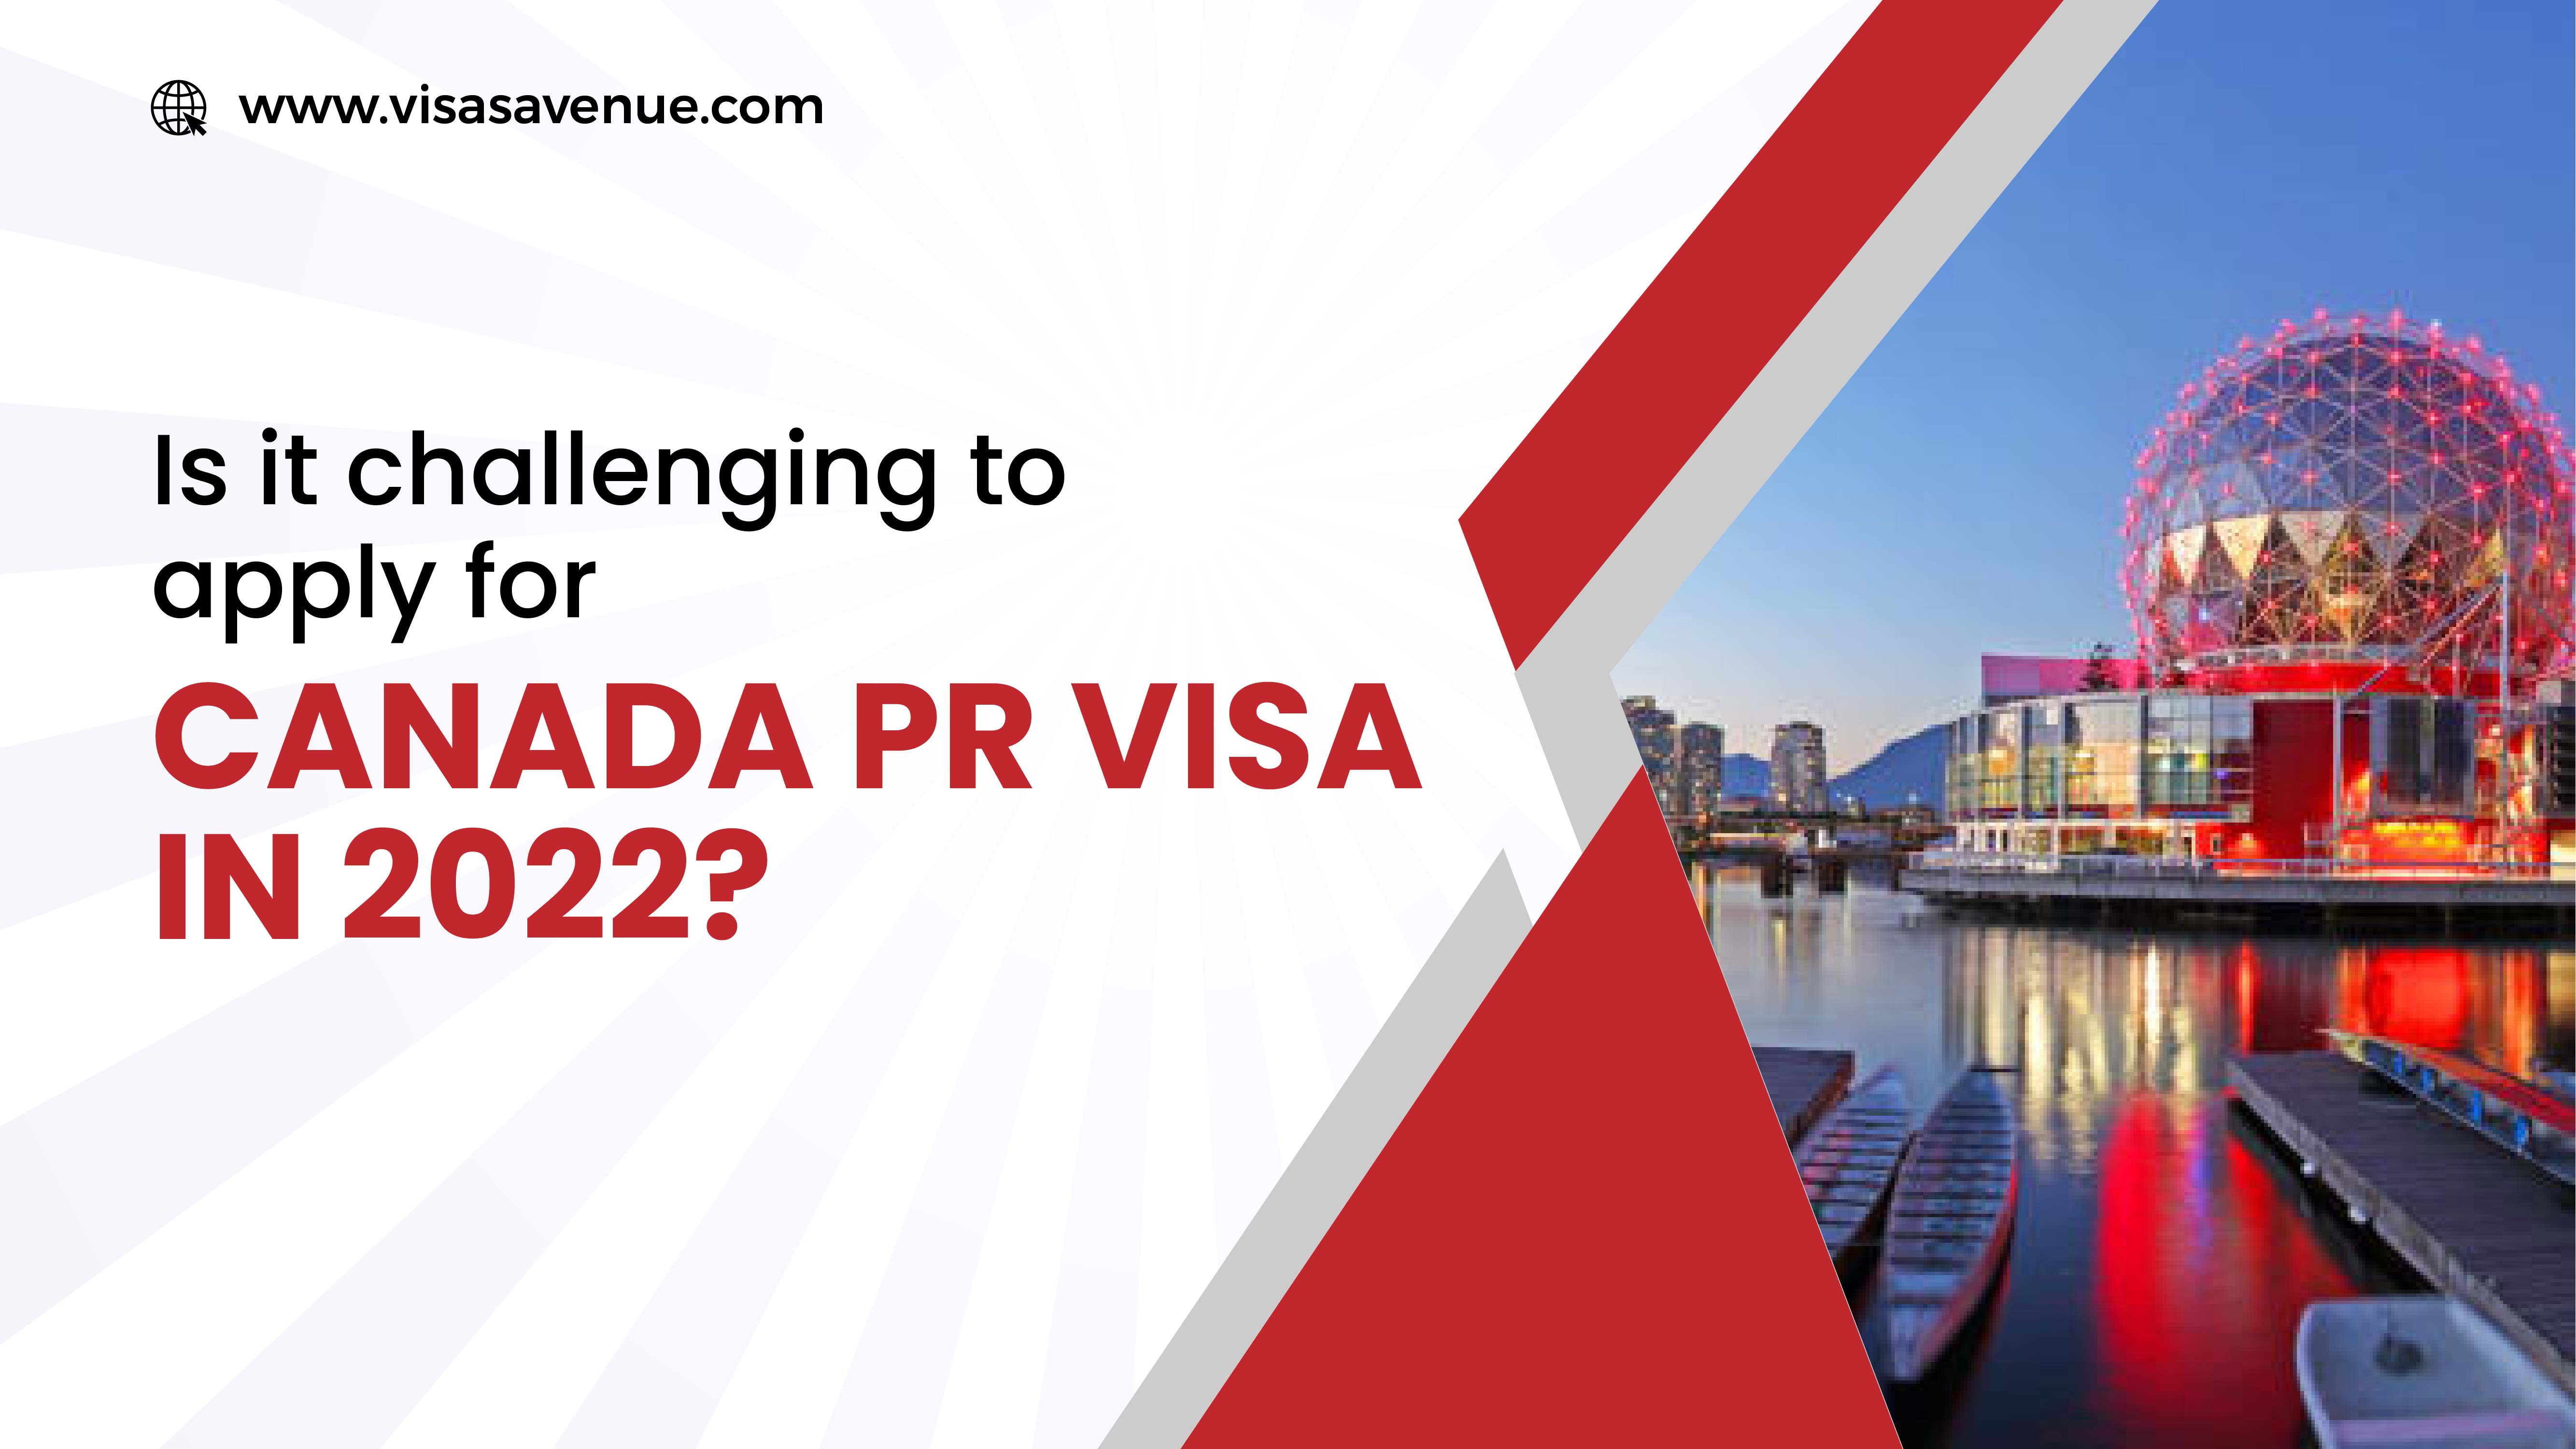 Is it challenging to apply for Canada PR Visa in 2022?